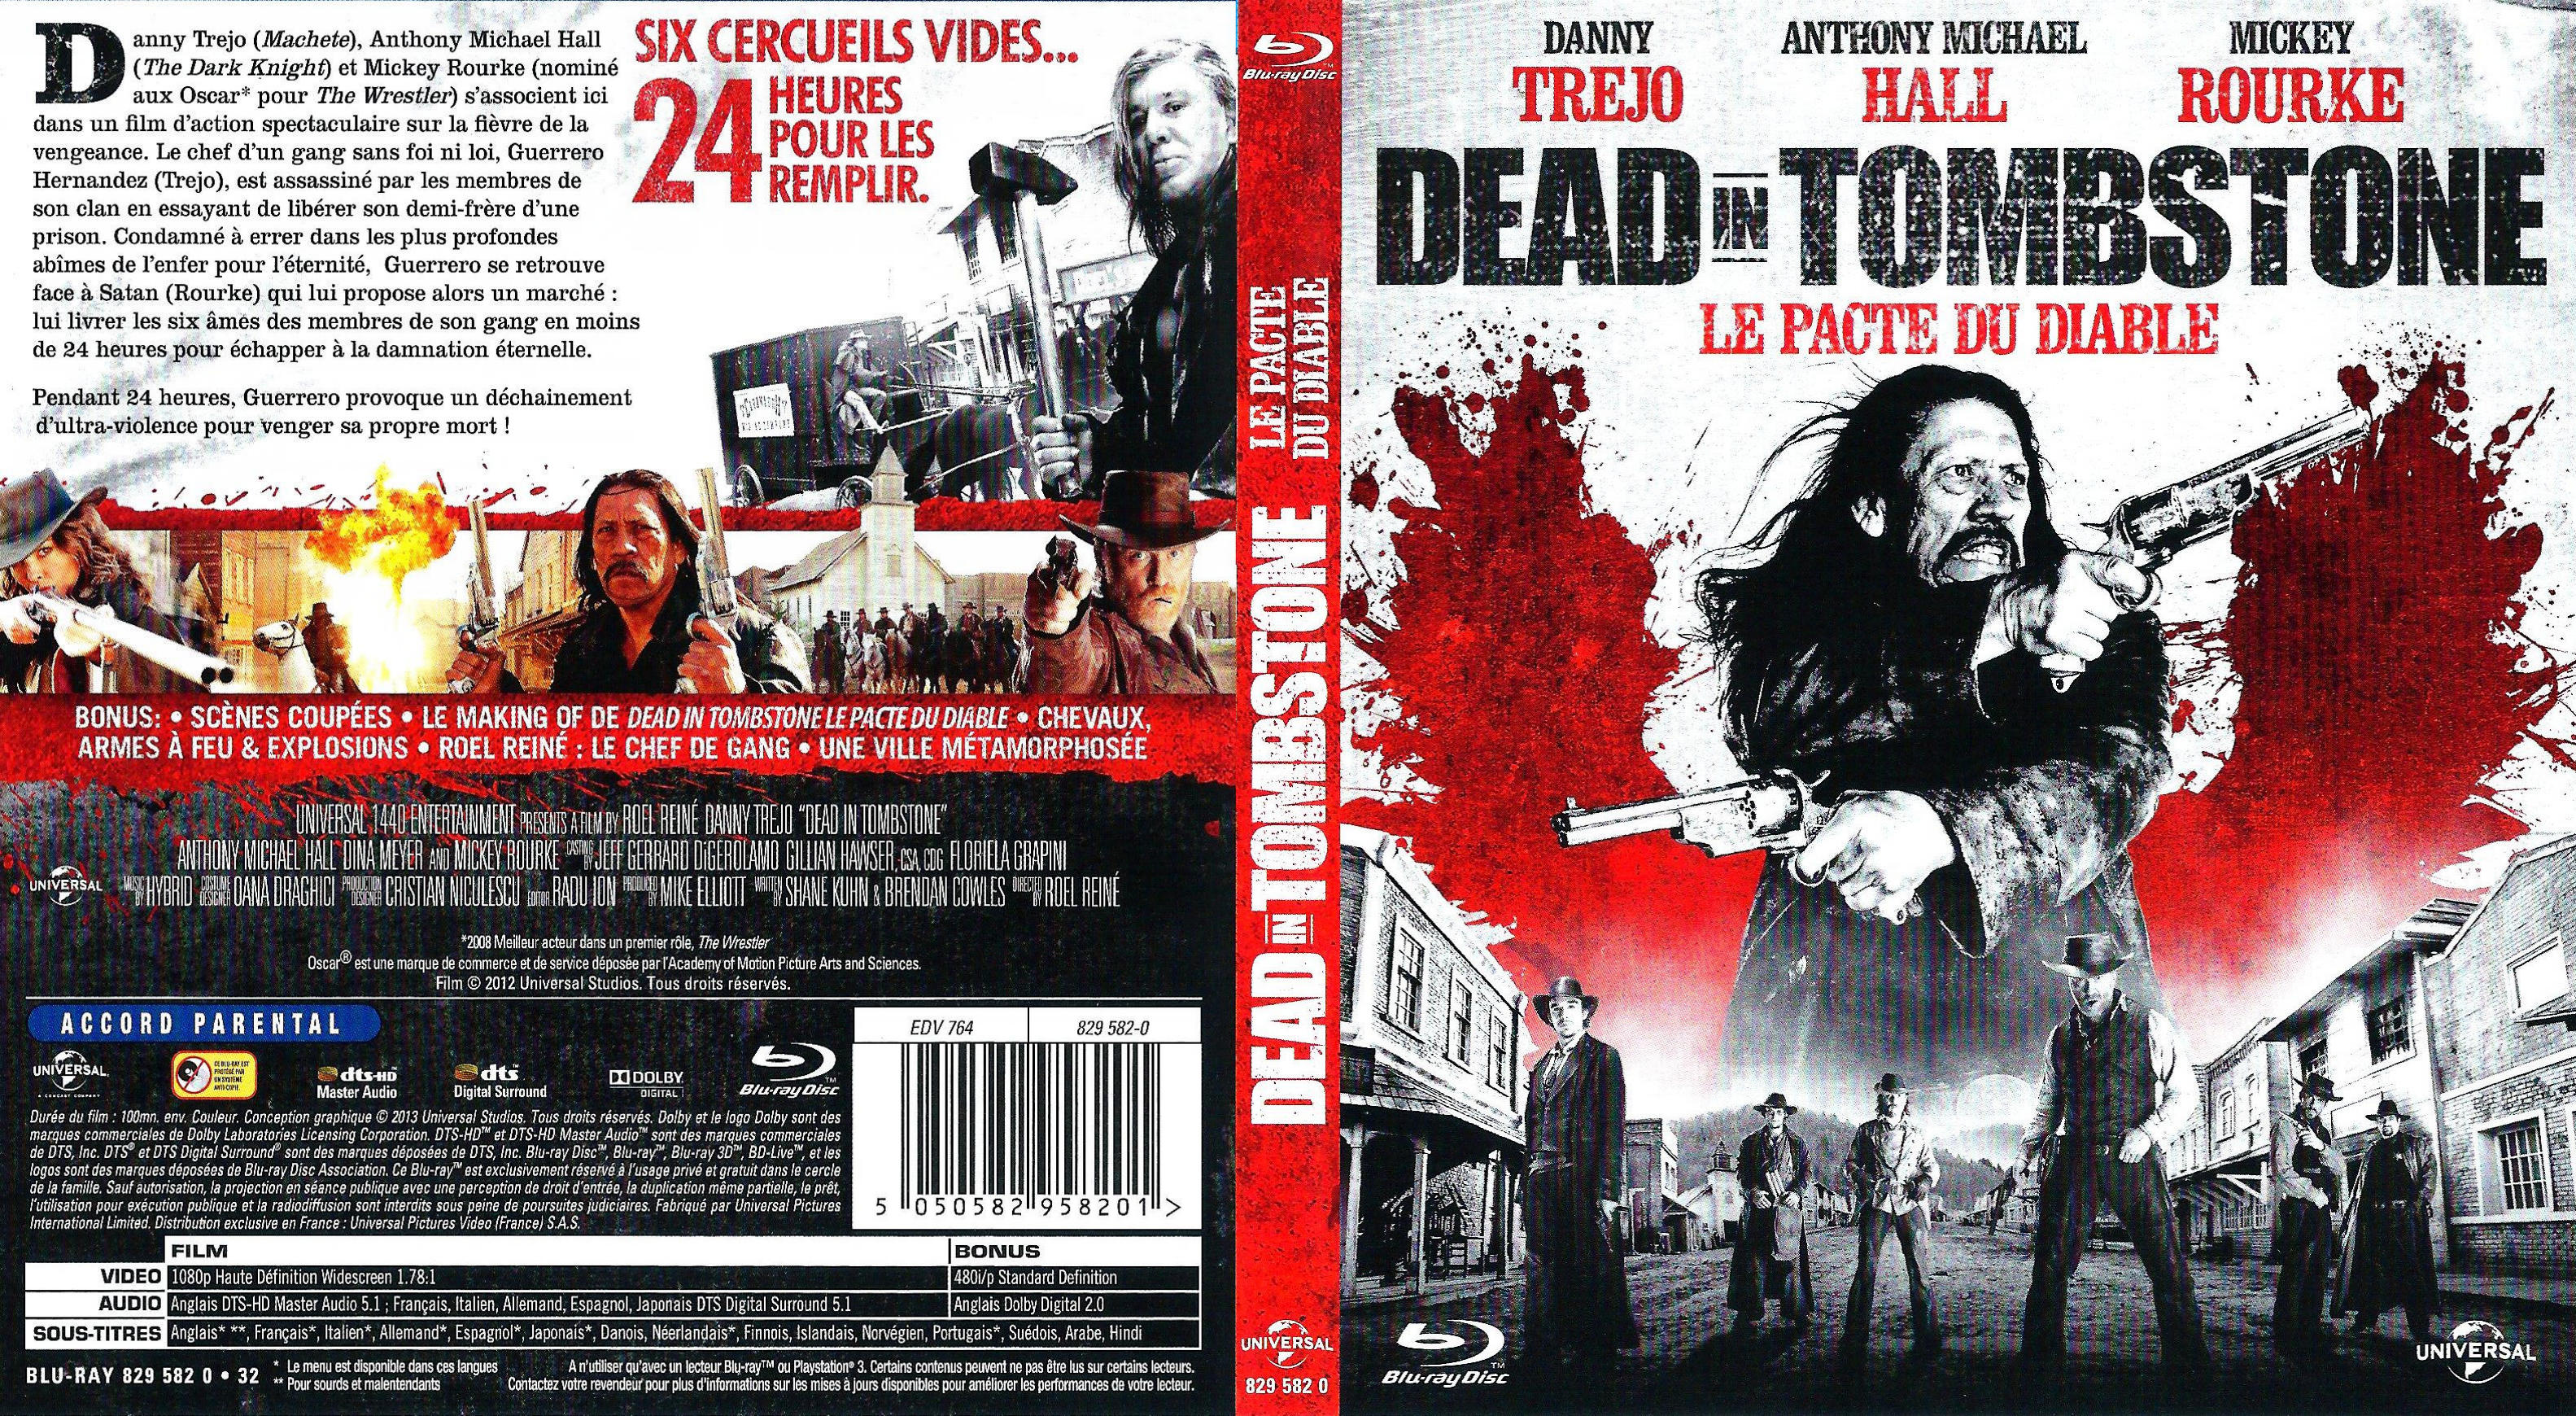 Jaquette DVD Dead in tombstone (BLU-RAY)